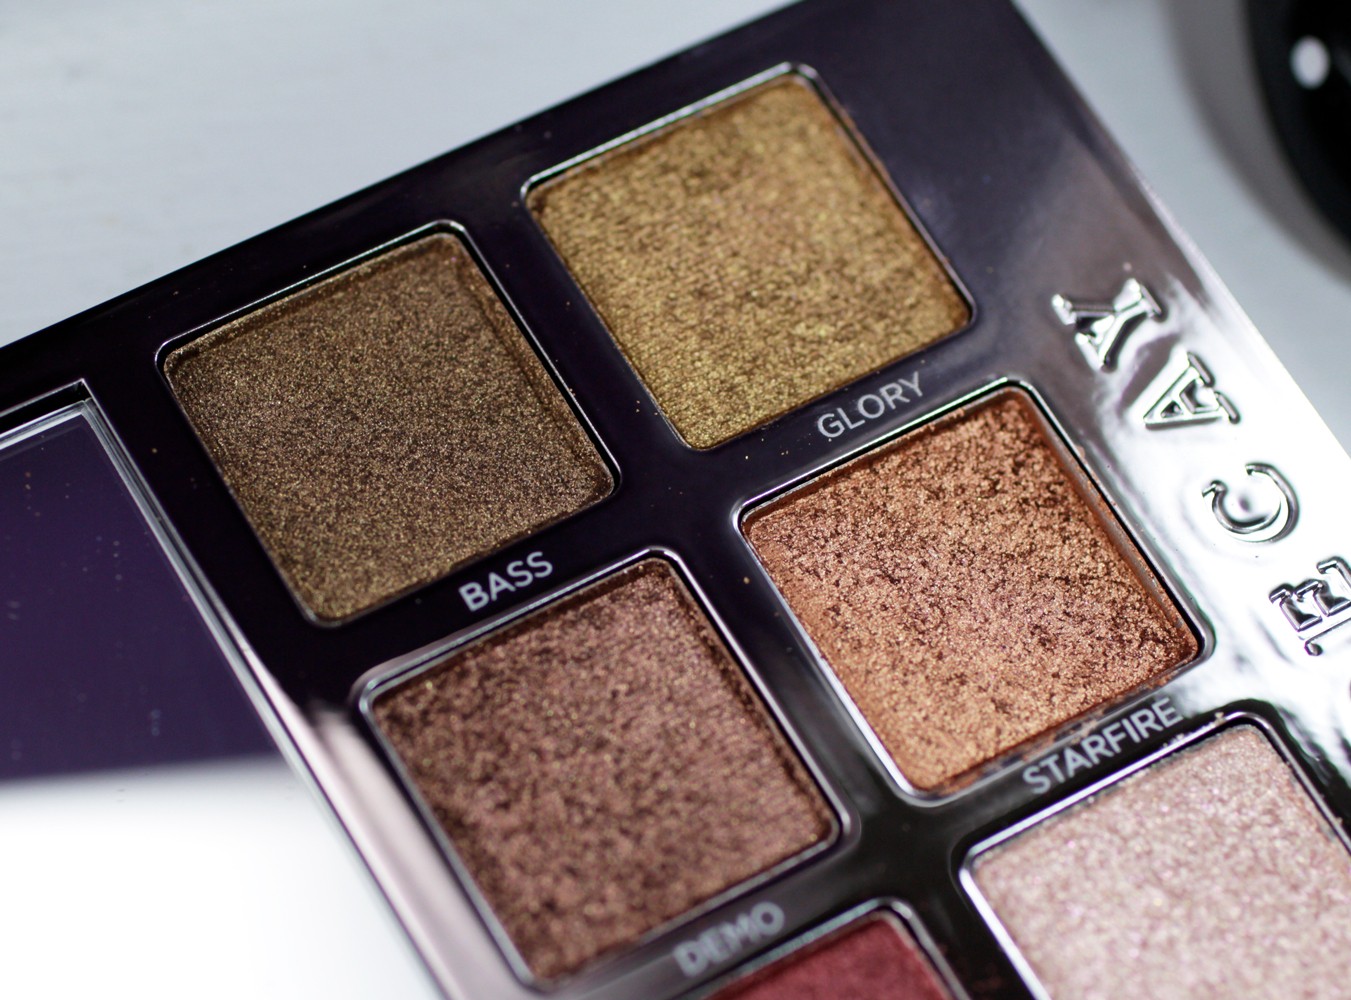 Urban Decay Heavy Metals Eyeshadow Palette - Bass and Glory - Urban Decay Heavy Metals Eyeshadow Palette review by popular Los Angeles cruelty free beauty blogger My Beauty Bunny